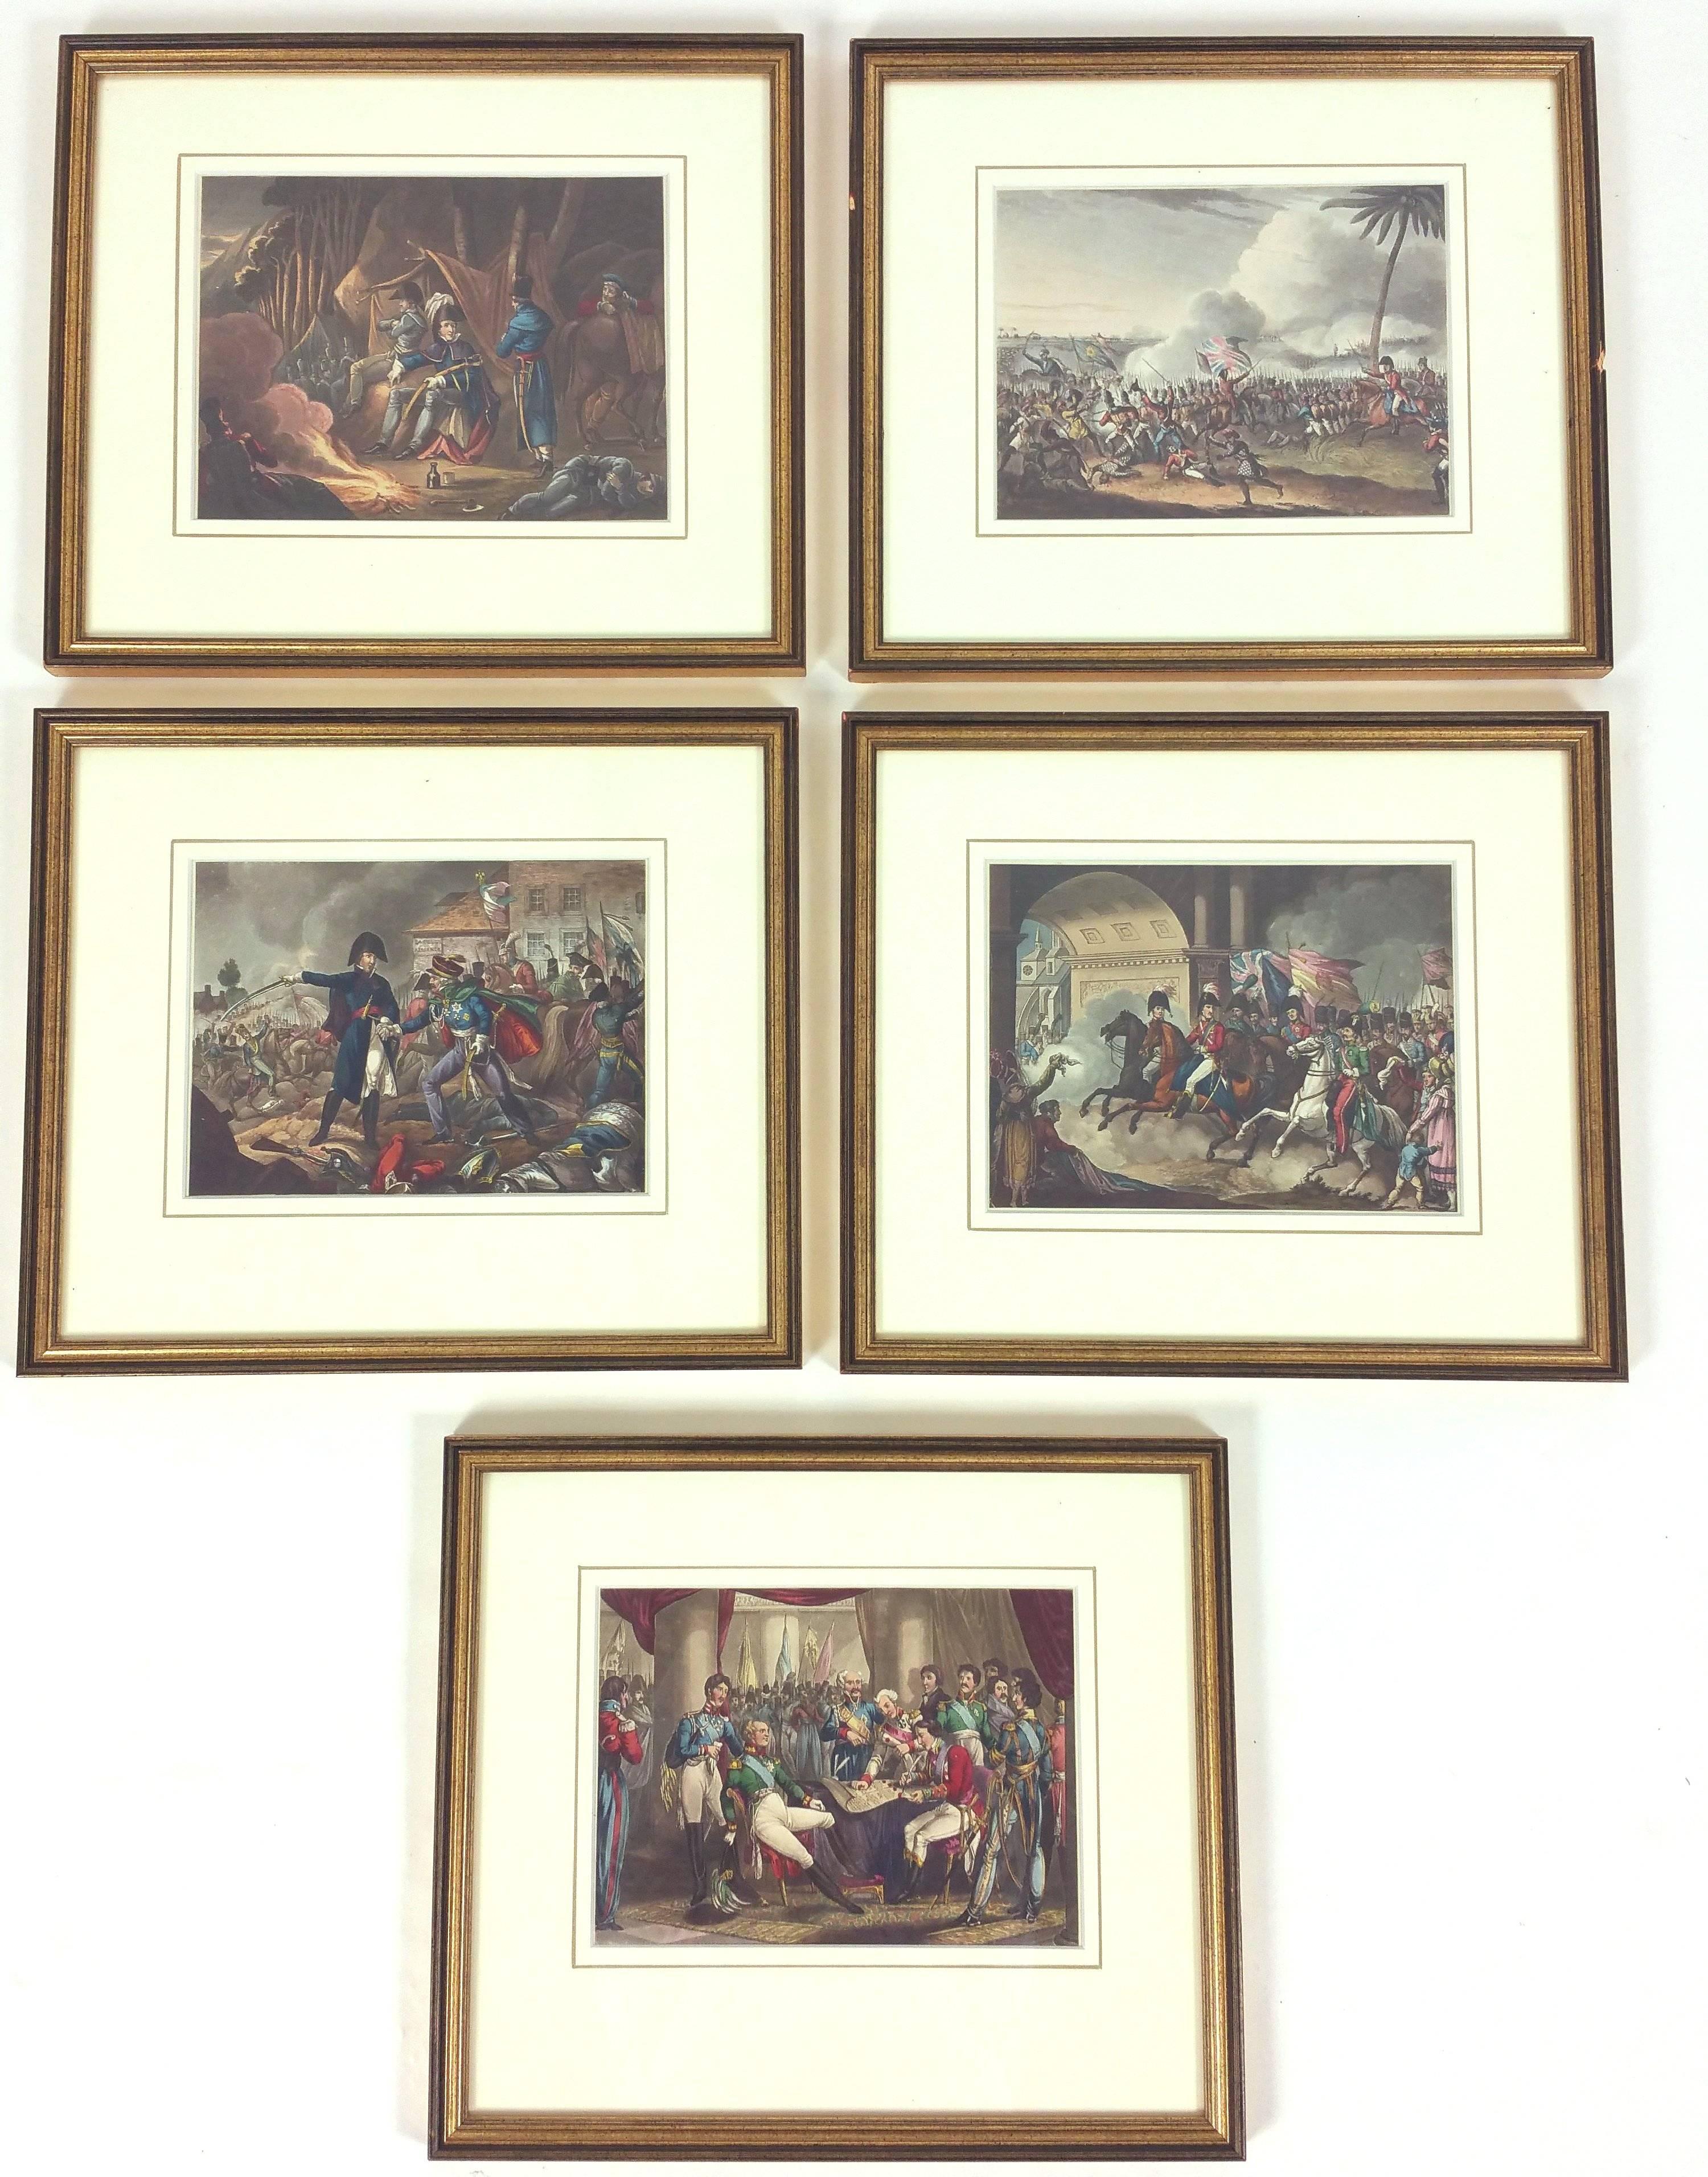 This superb and highly detailed set of 15 early 19th century hand colored military prints depict the various stages of battles, from beginning to end, of the Napoleonic War. The prints are very skillfully done and are all giltwood framed under